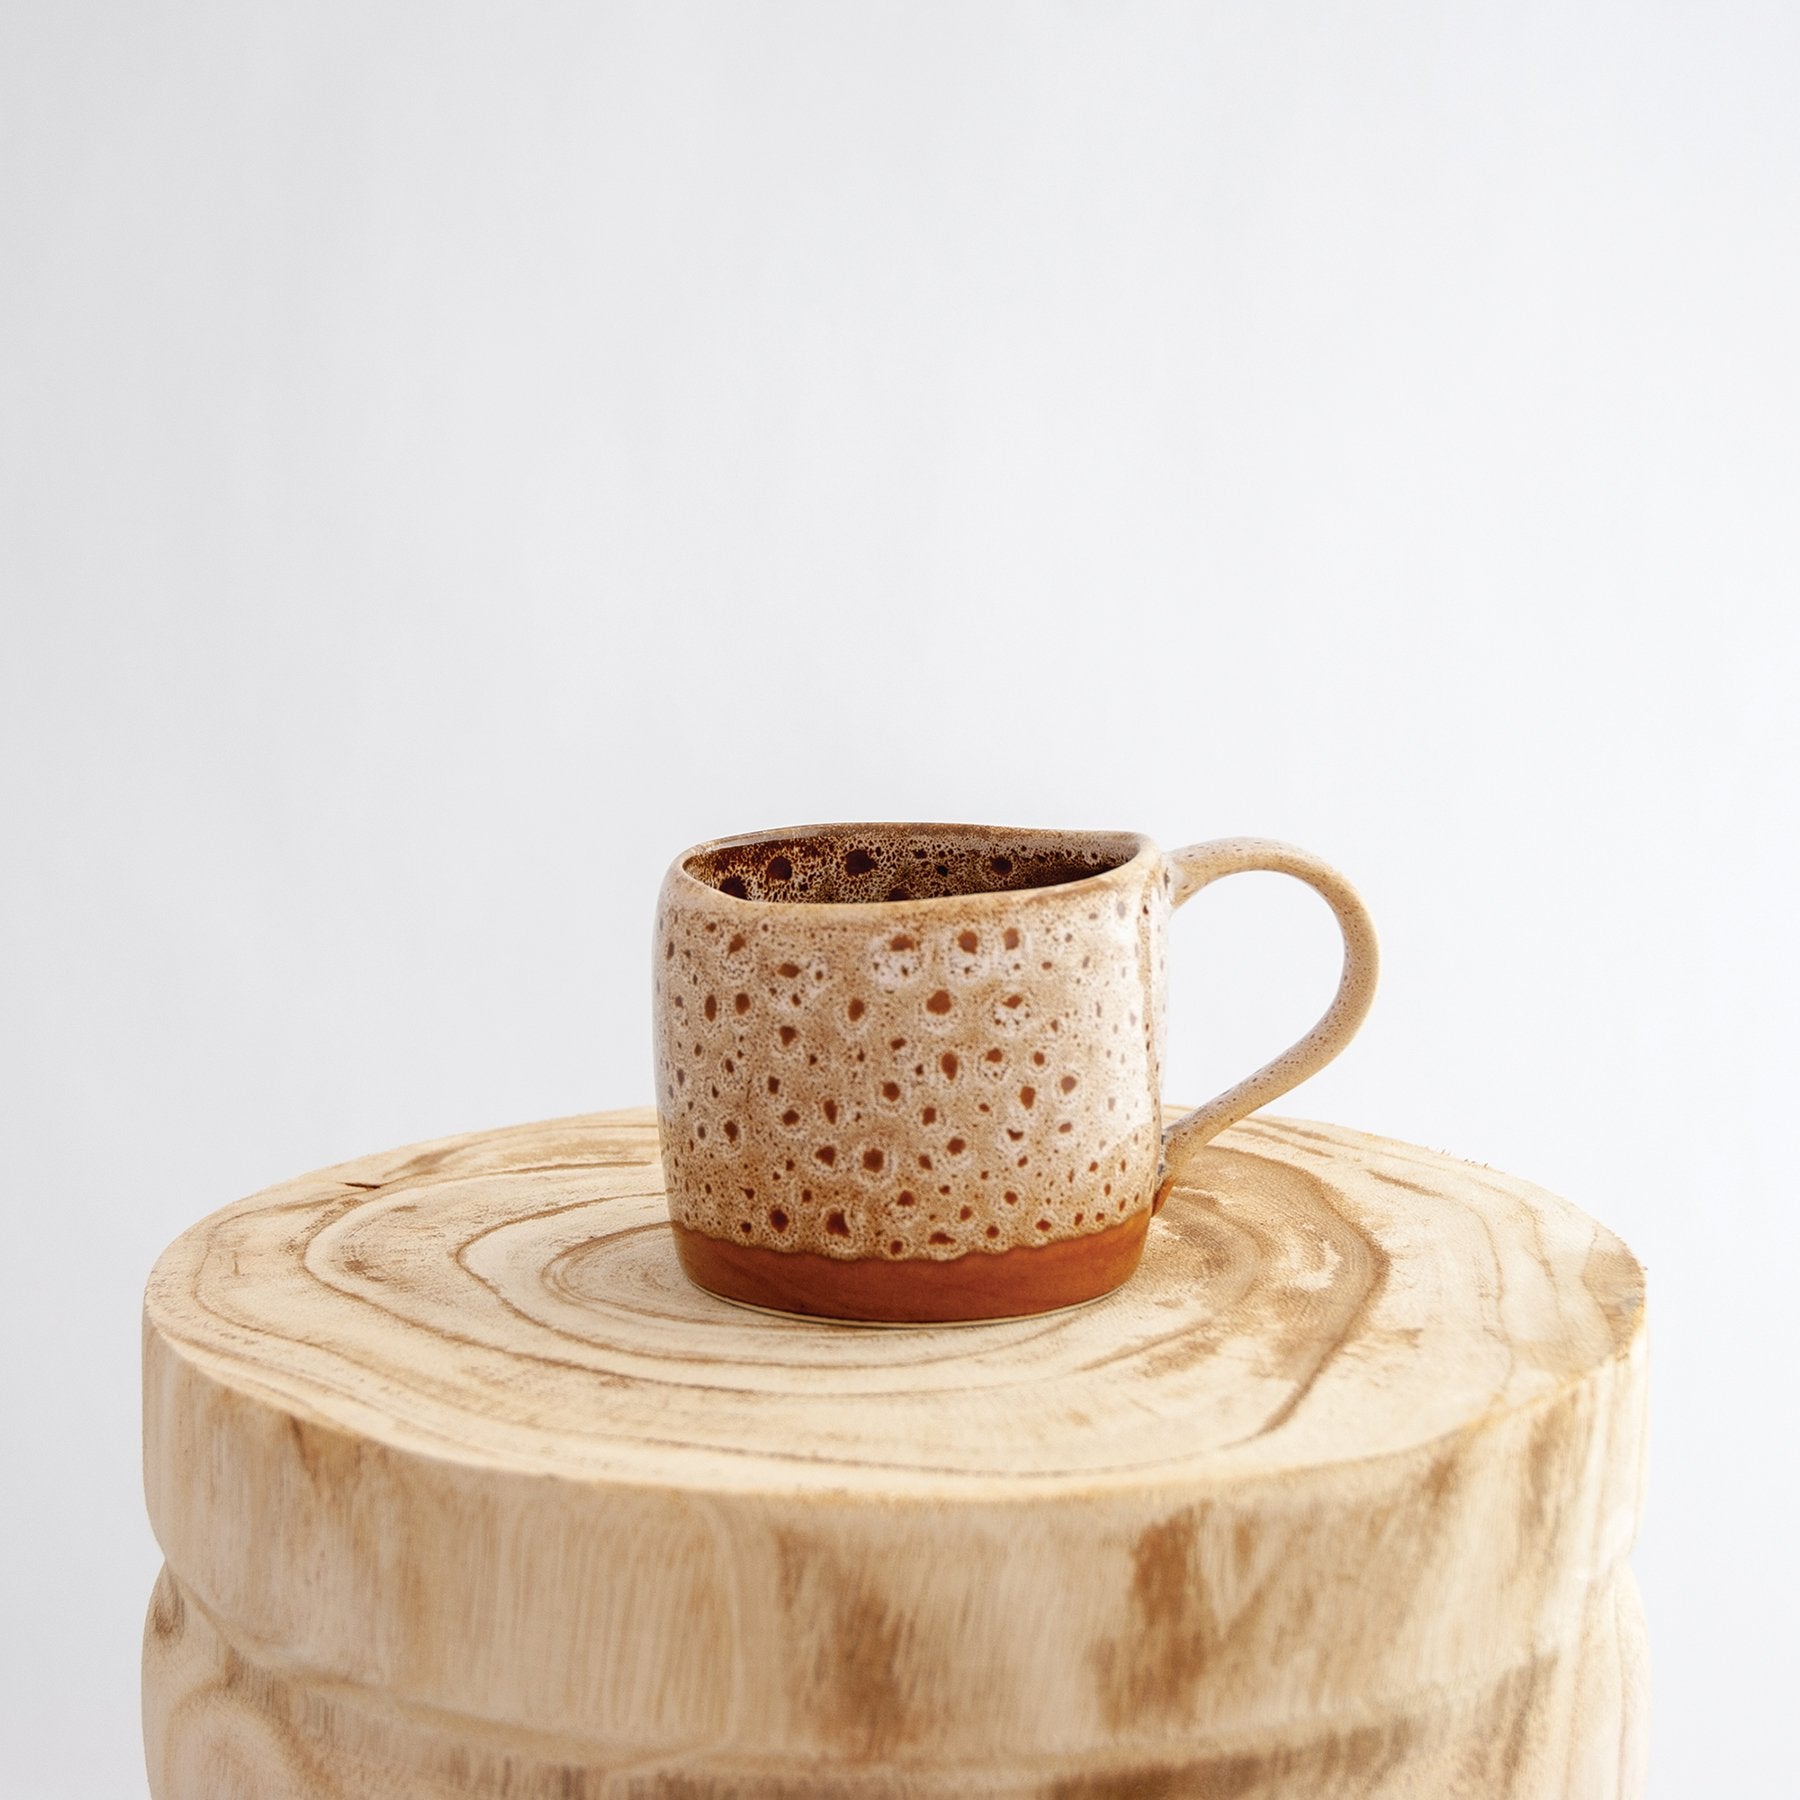 Robert Gordon white ochre organic mug coffee cup sitting on a natural wooden round side table